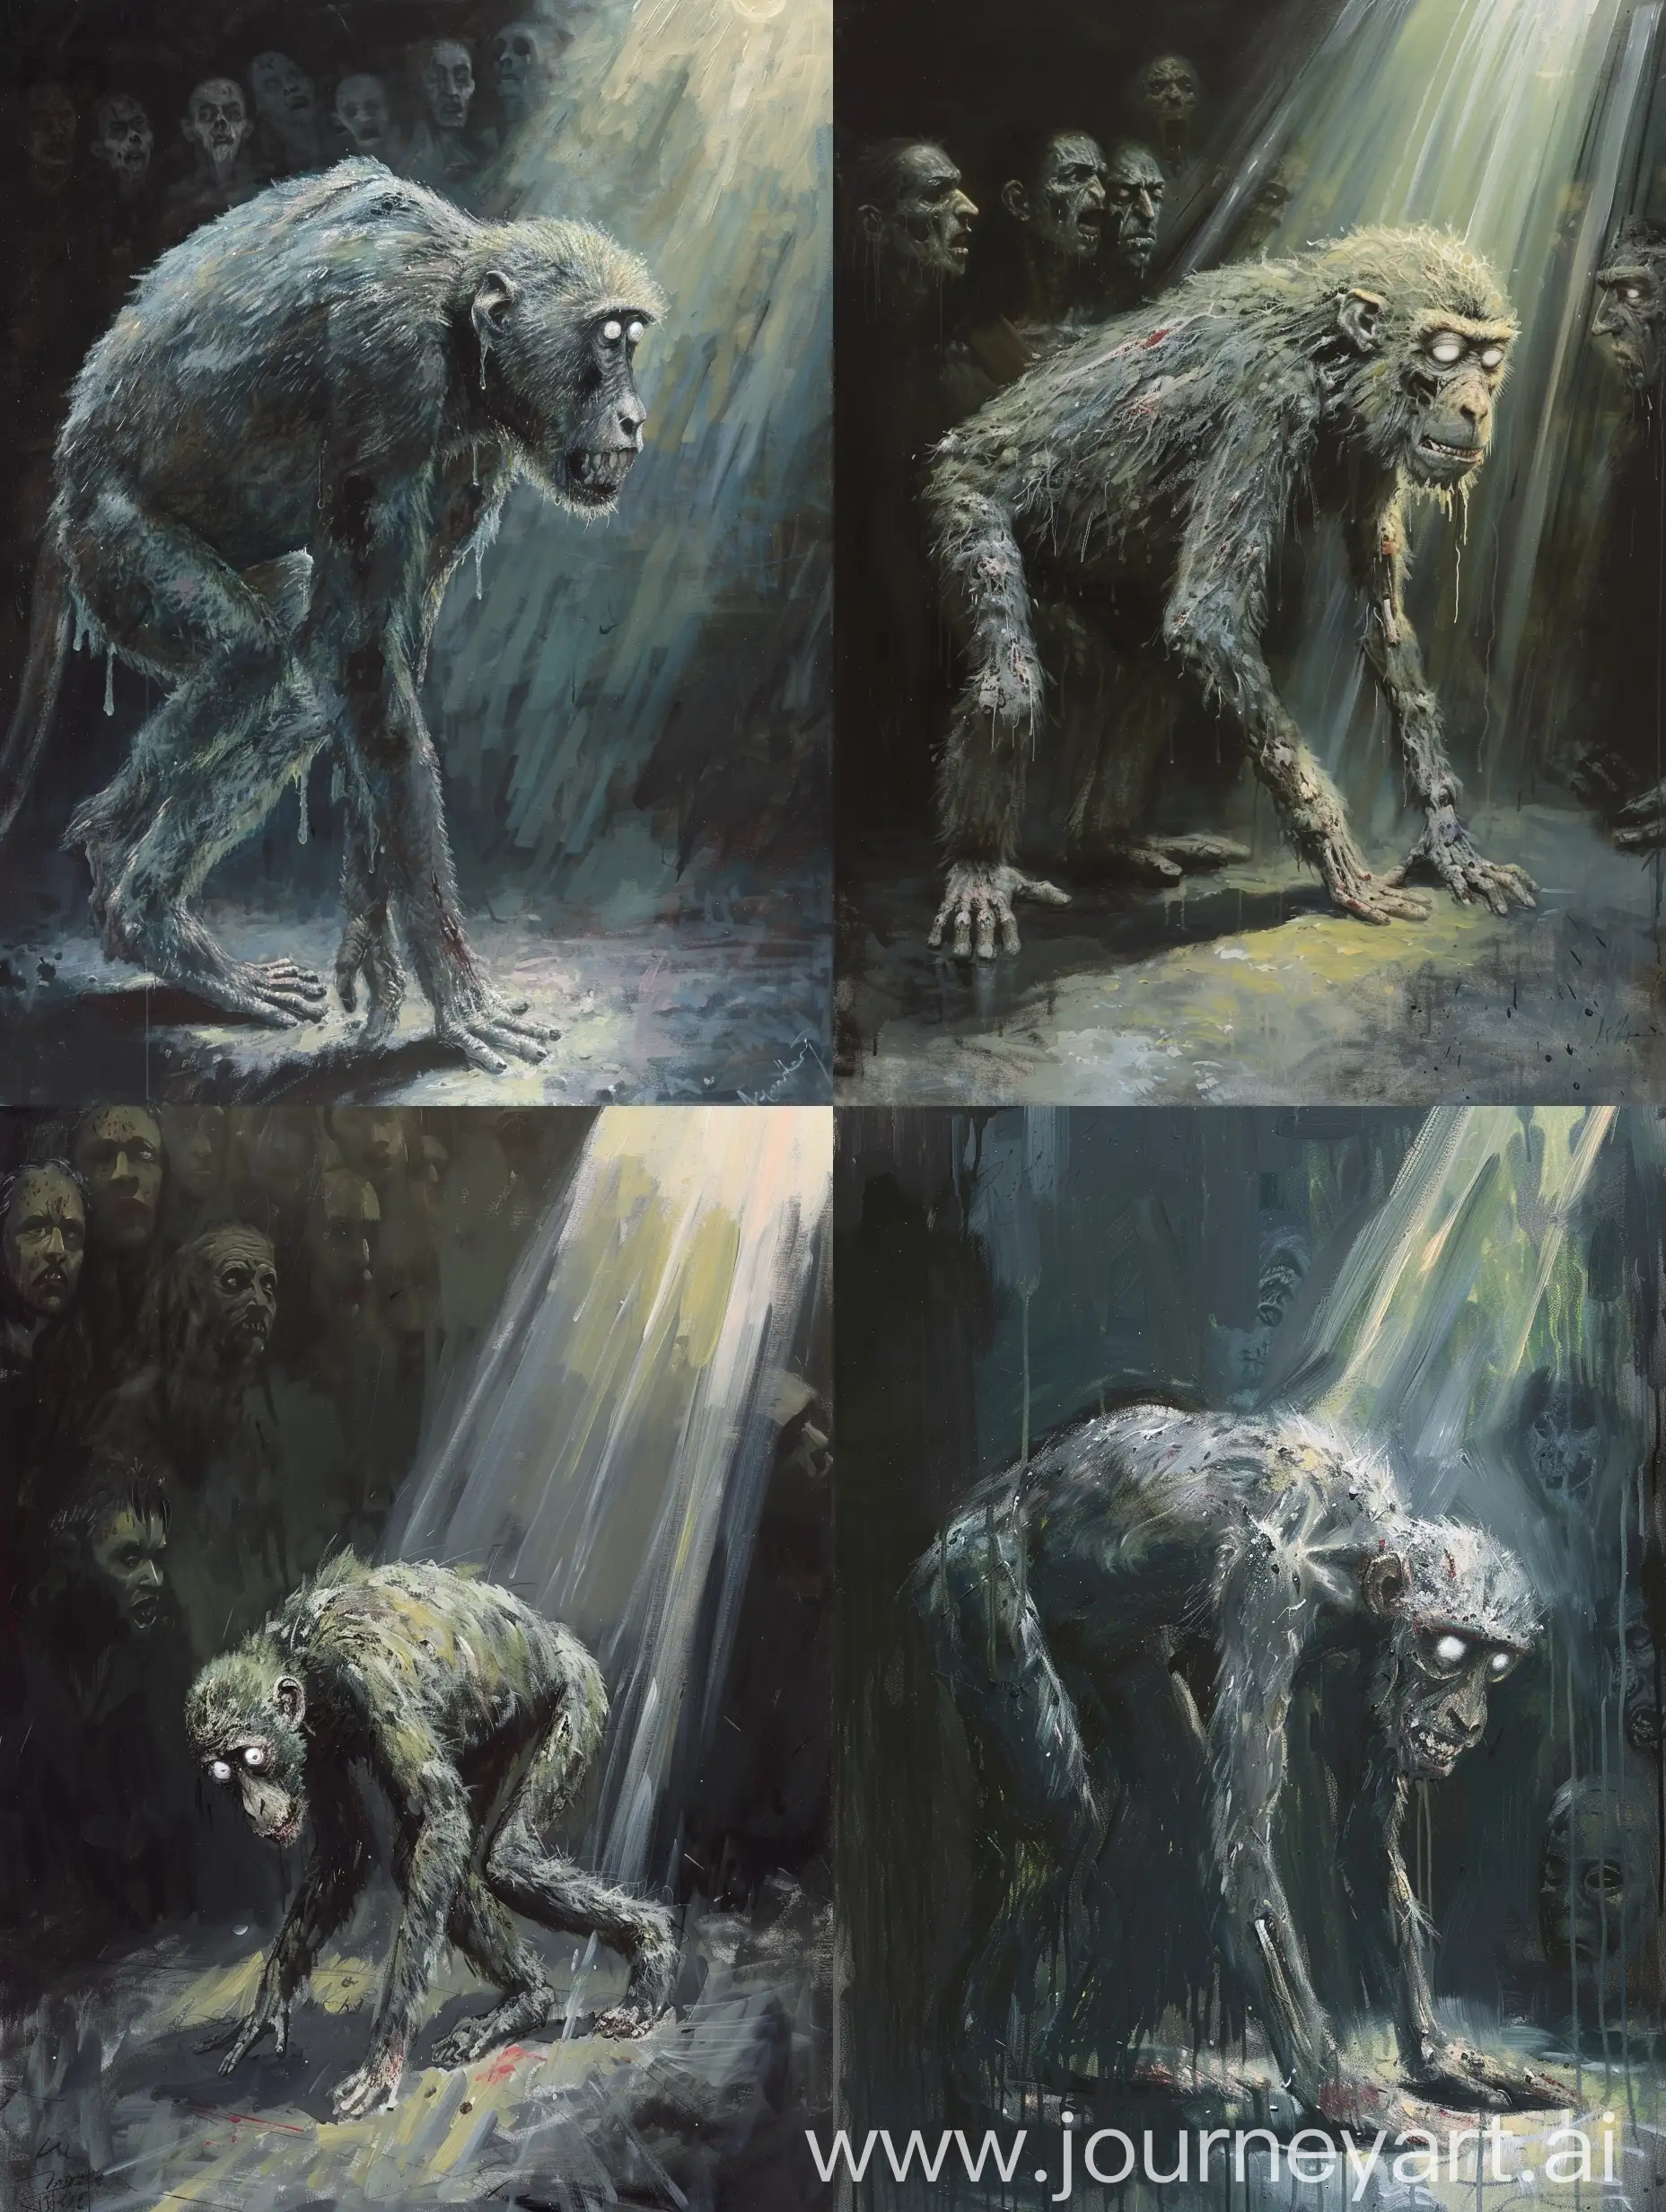 Artistic style: The painting should be done in the style of impressionism, with vague and clear strokes, similar to the work of Claude Monet. This style will help convey the atmosphere of mysticism and nervousness that surrounds the zombie baboon.  Color scheme: The zombie baboon should be grayish in color, with elements of green, as well as with rotting flesh and protruding bones. The baboon's eyes should be white, blind, with white, slightly bluish pupils. The surrounding space should be presented in dark, black and gray tones, giving the impression of darkness and menace.  Composition: The zombie baboon should be in the center of the painting, walking slowly and hunched towards the light, which comes in light yellow, almost white rays from the upper right corner of the painting. Such a composition will create a feeling of movement and tension, accentuated by a mystical atmosphere.  Lighting: The main light source should be the rays coming from the upper right corner of the painting, illuminating the zombie baboon and creating a contrast between darkness and light. This lighting should highlight the ominous and ambiguous nature of the scene.  Mood: The picture should evoke a sense of fear, anxiety and nervousness in the viewer. The zombie baboon, with its soiled and rotting appearance, should create a feeling of disgust and horror. The surrounding faces in the dark should enhance this sense of uncertainty and threat.  Details: The baboon must have a ragged, stained, wet coat reflecting its zombie state. His bones should be visible, creating an effect of horror and disgust in the viewer. The zombie must bend over, with its arms hanging, giving the impression of slow and clumsy movement.